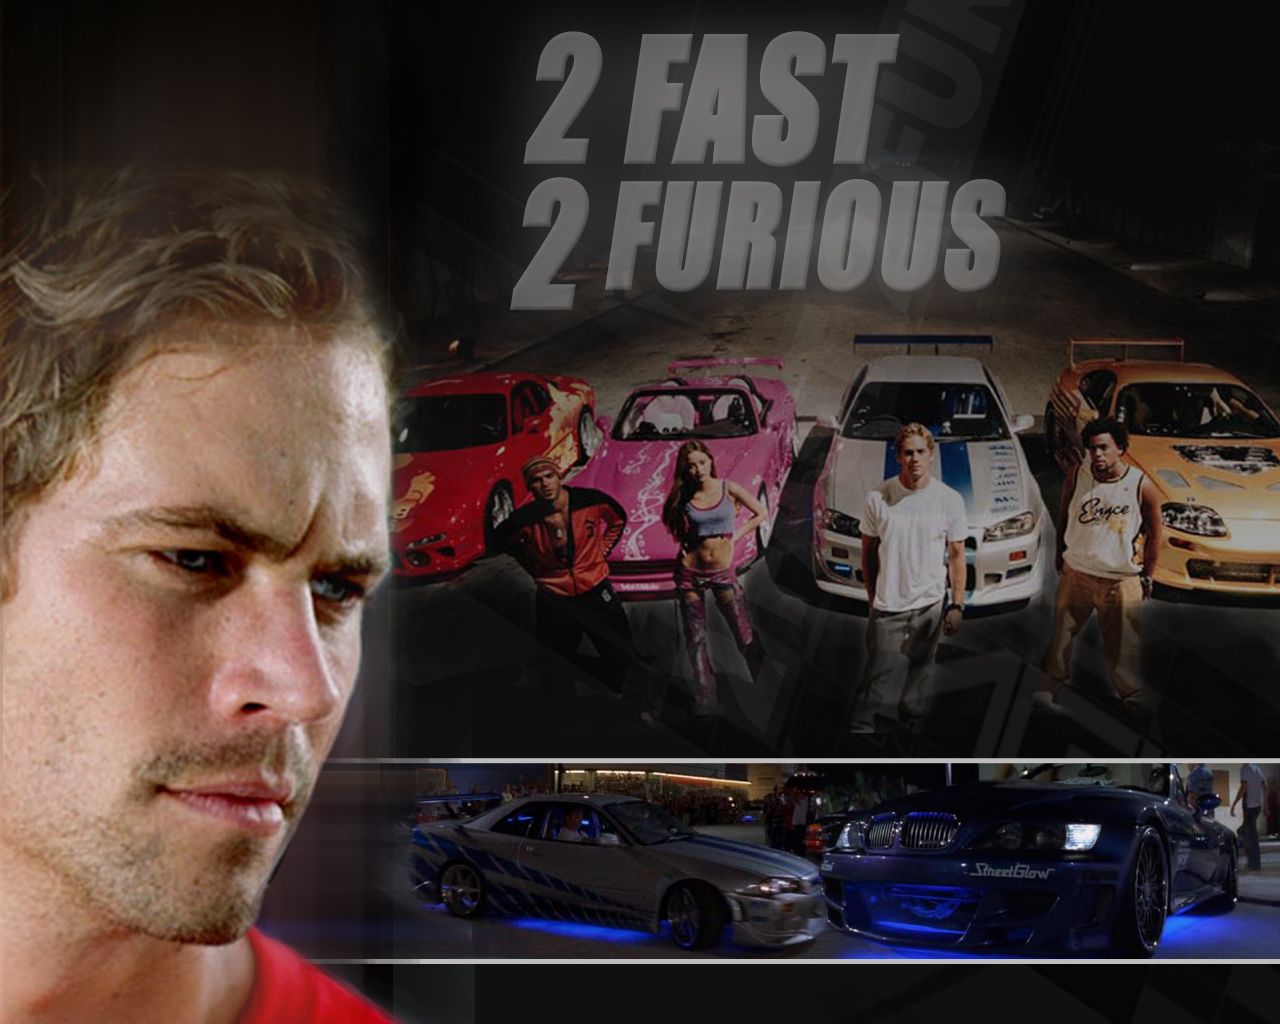 2 fast 2 furious free download